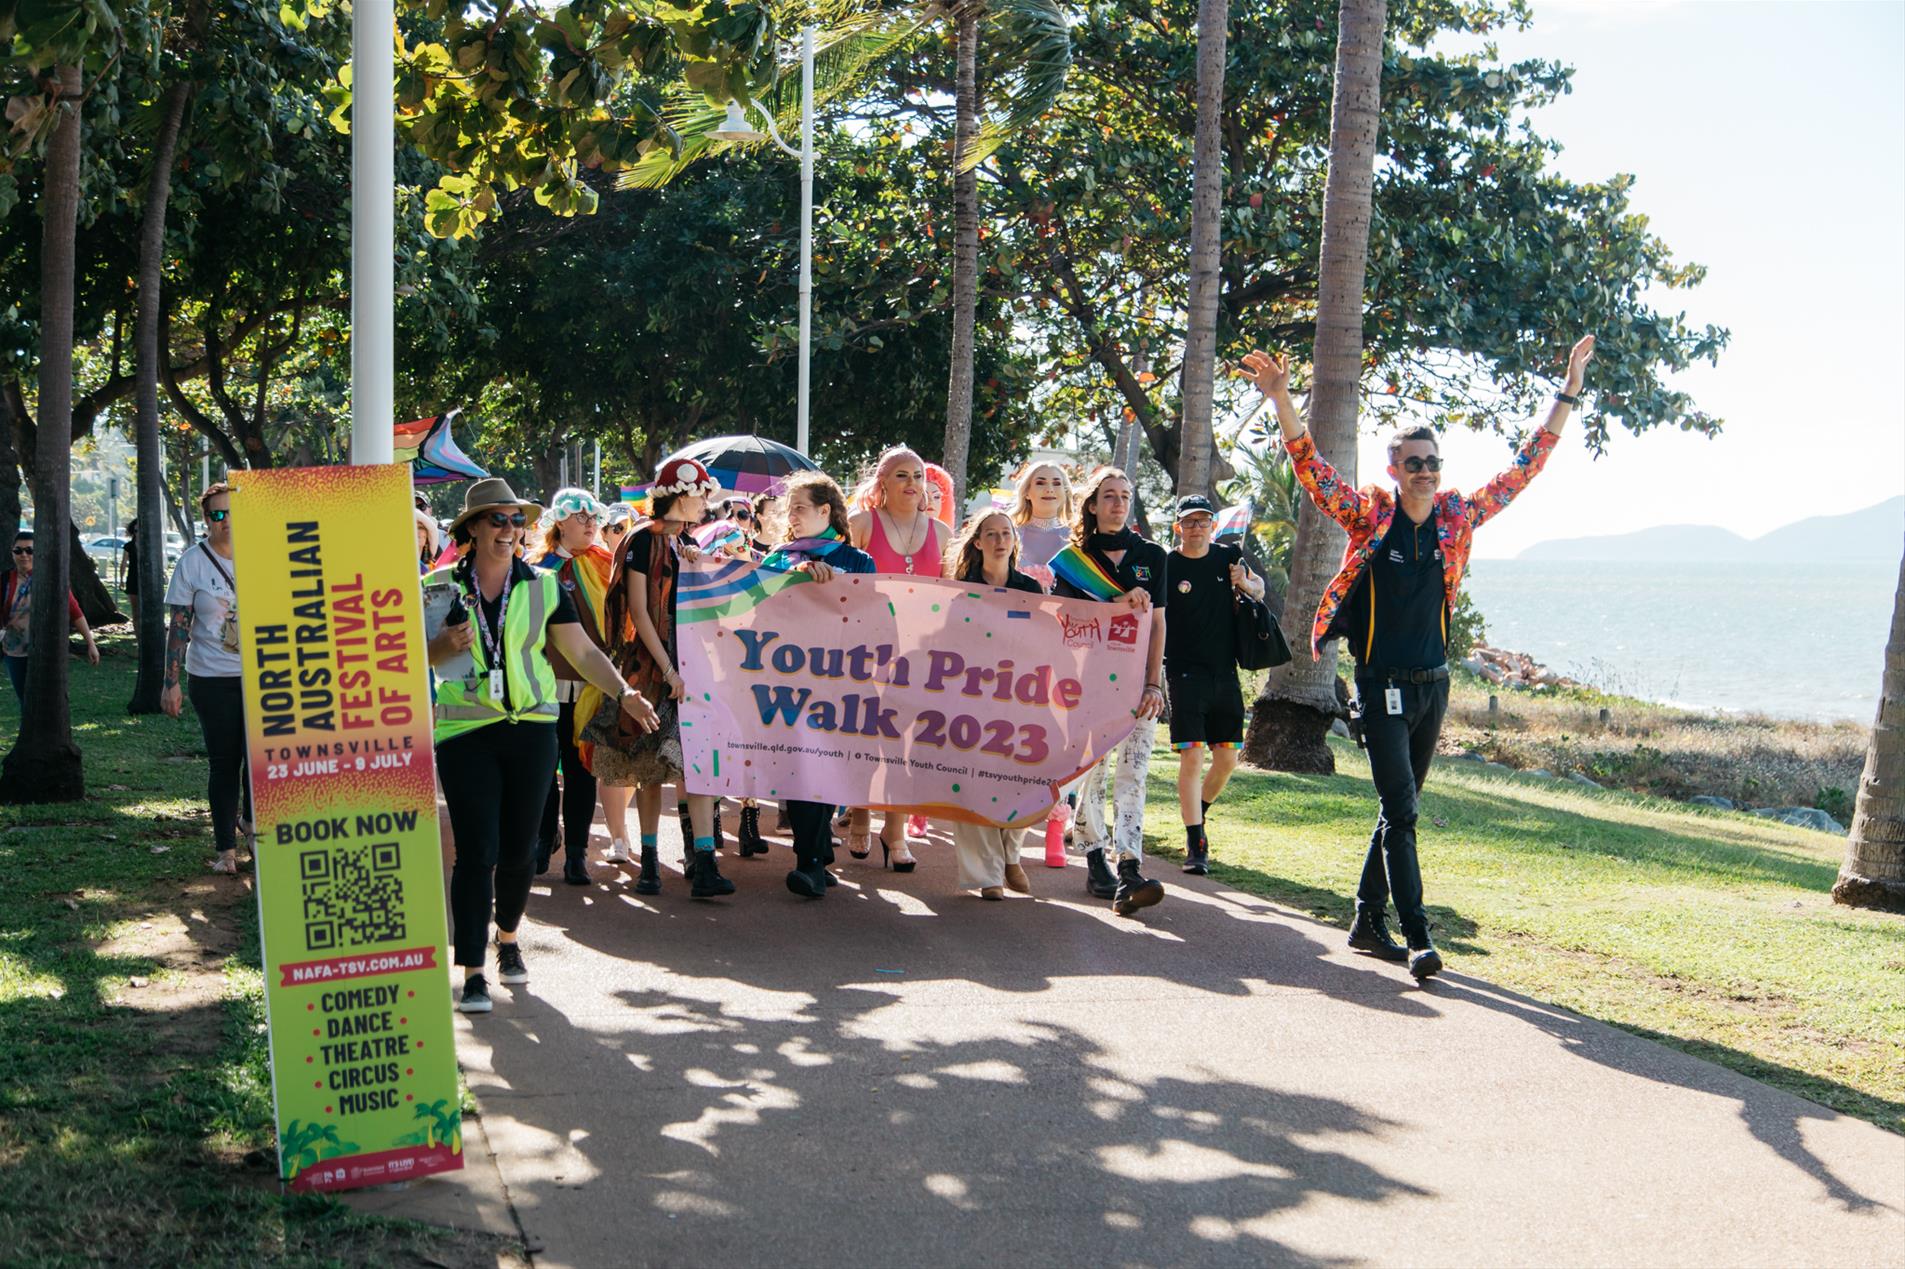 A group of people wearing colourful clothes holding a banner.